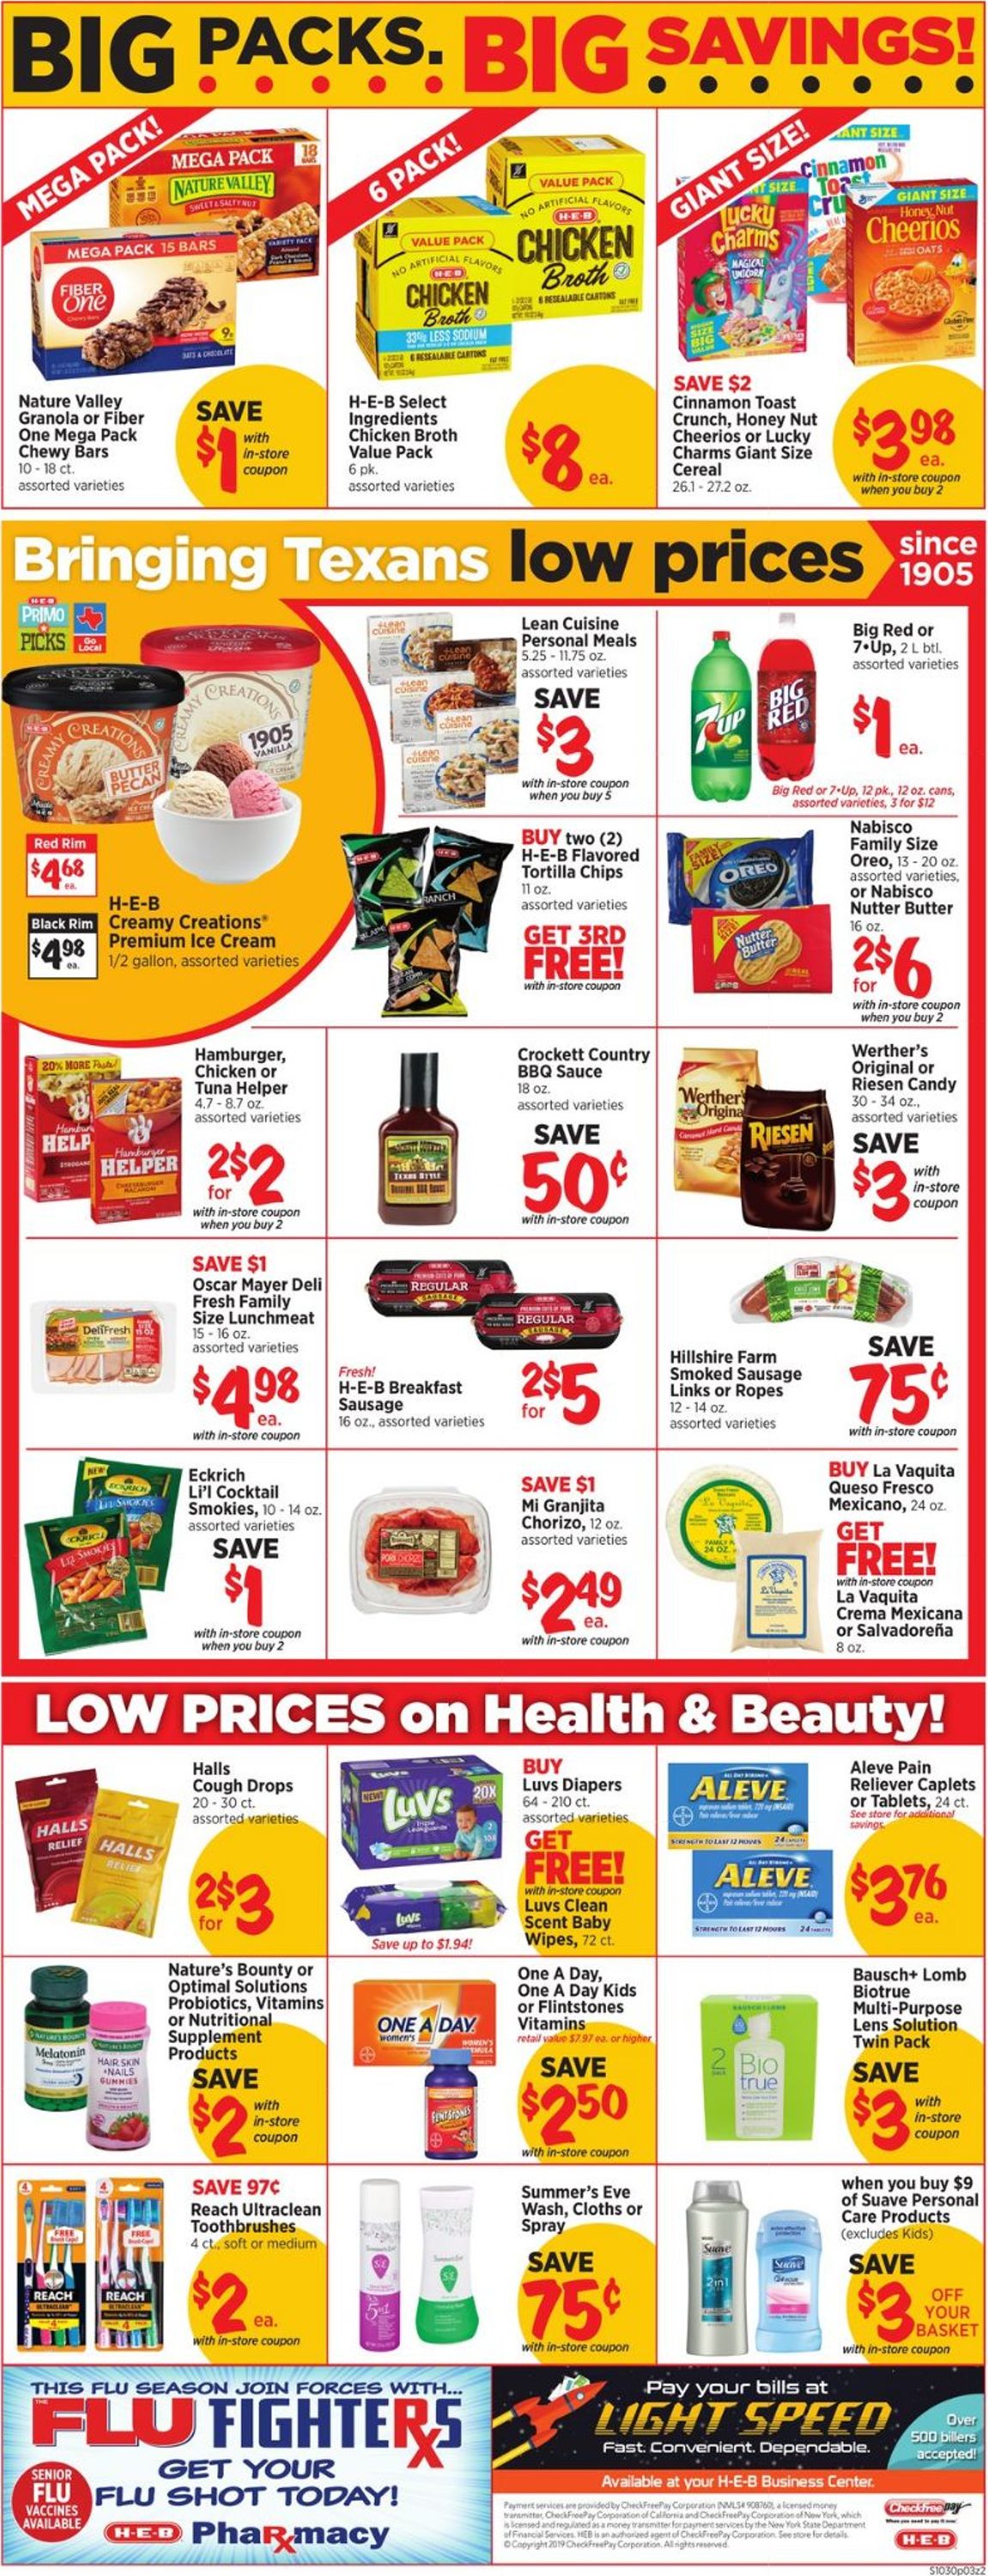 H-E-B Current weekly ad 10/30 - 11/05/2019 [11] - frequent-ads.com